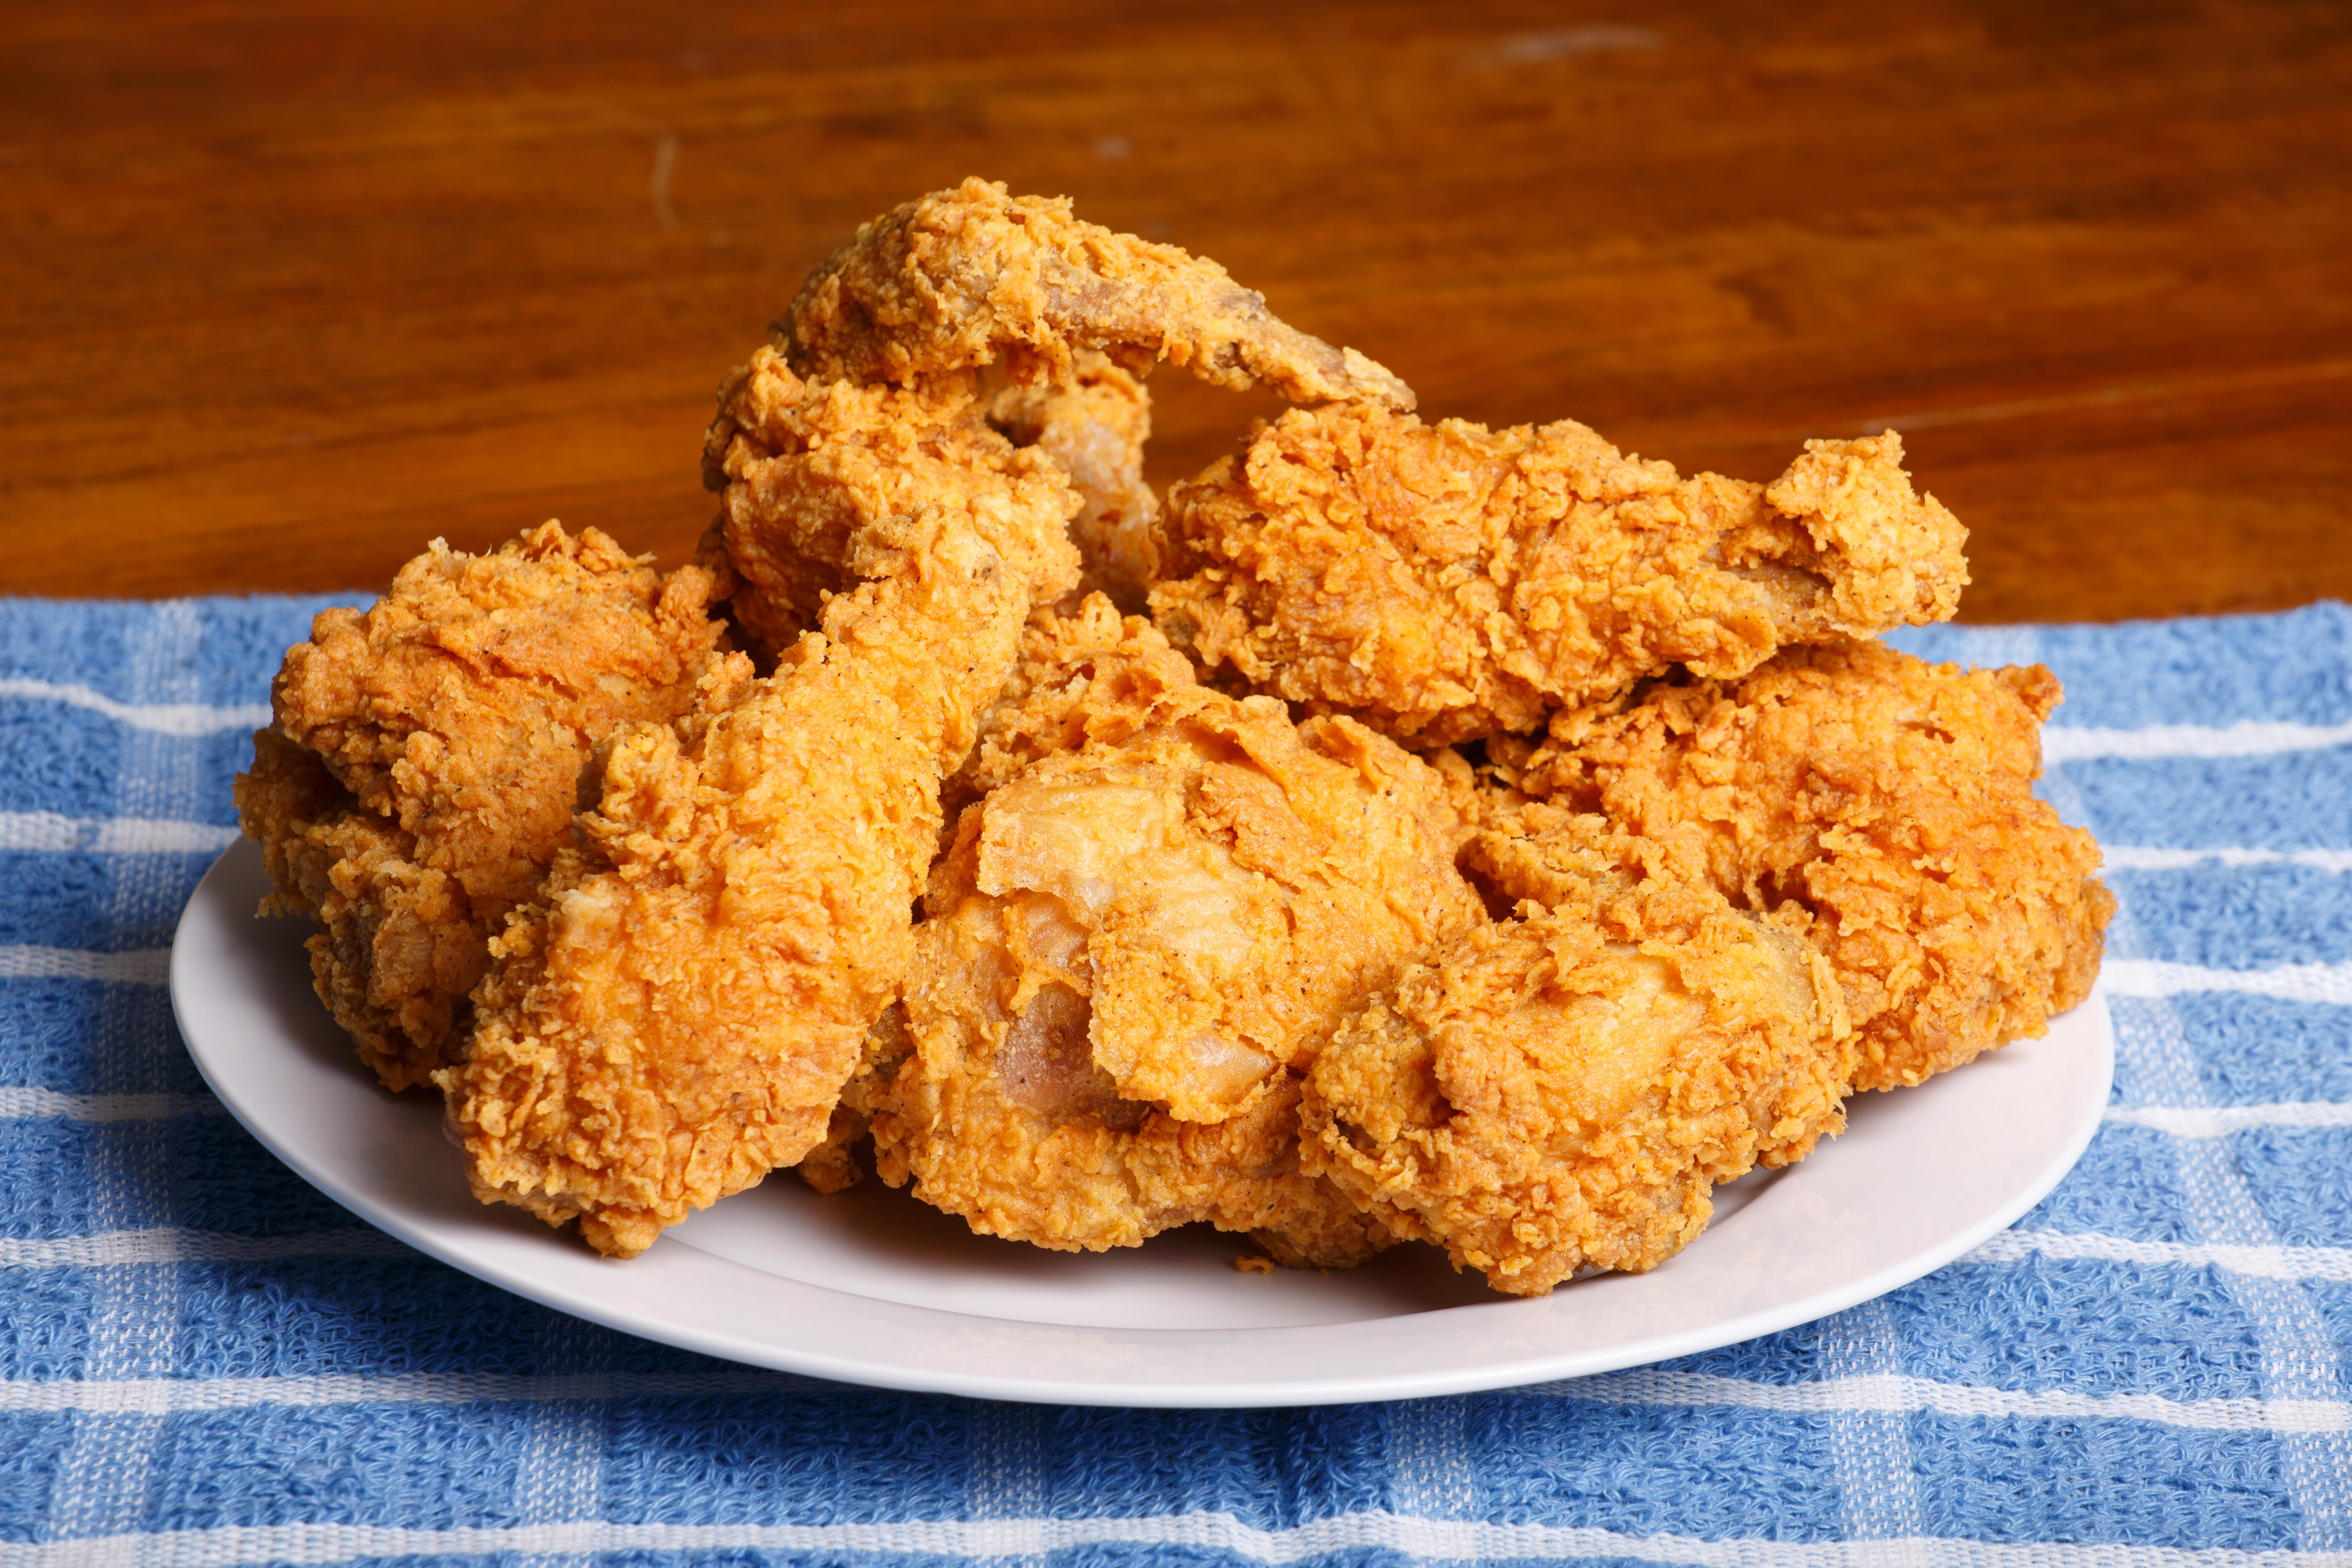 This Classic Restaurant Serves The Best Fried Chicken In Indiana | iHeart